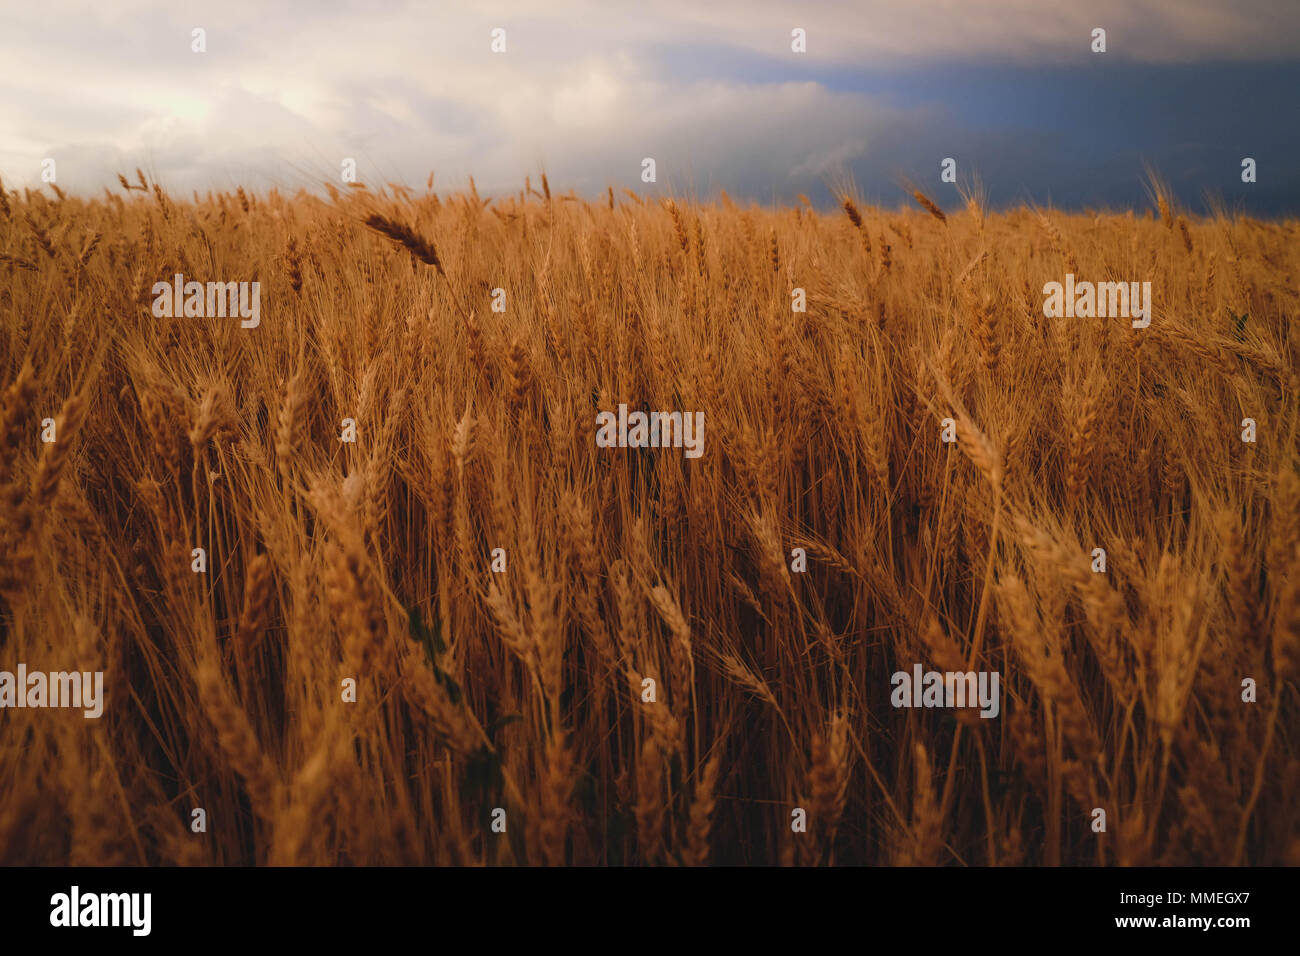 Wheat field with stormy background Stock Photo